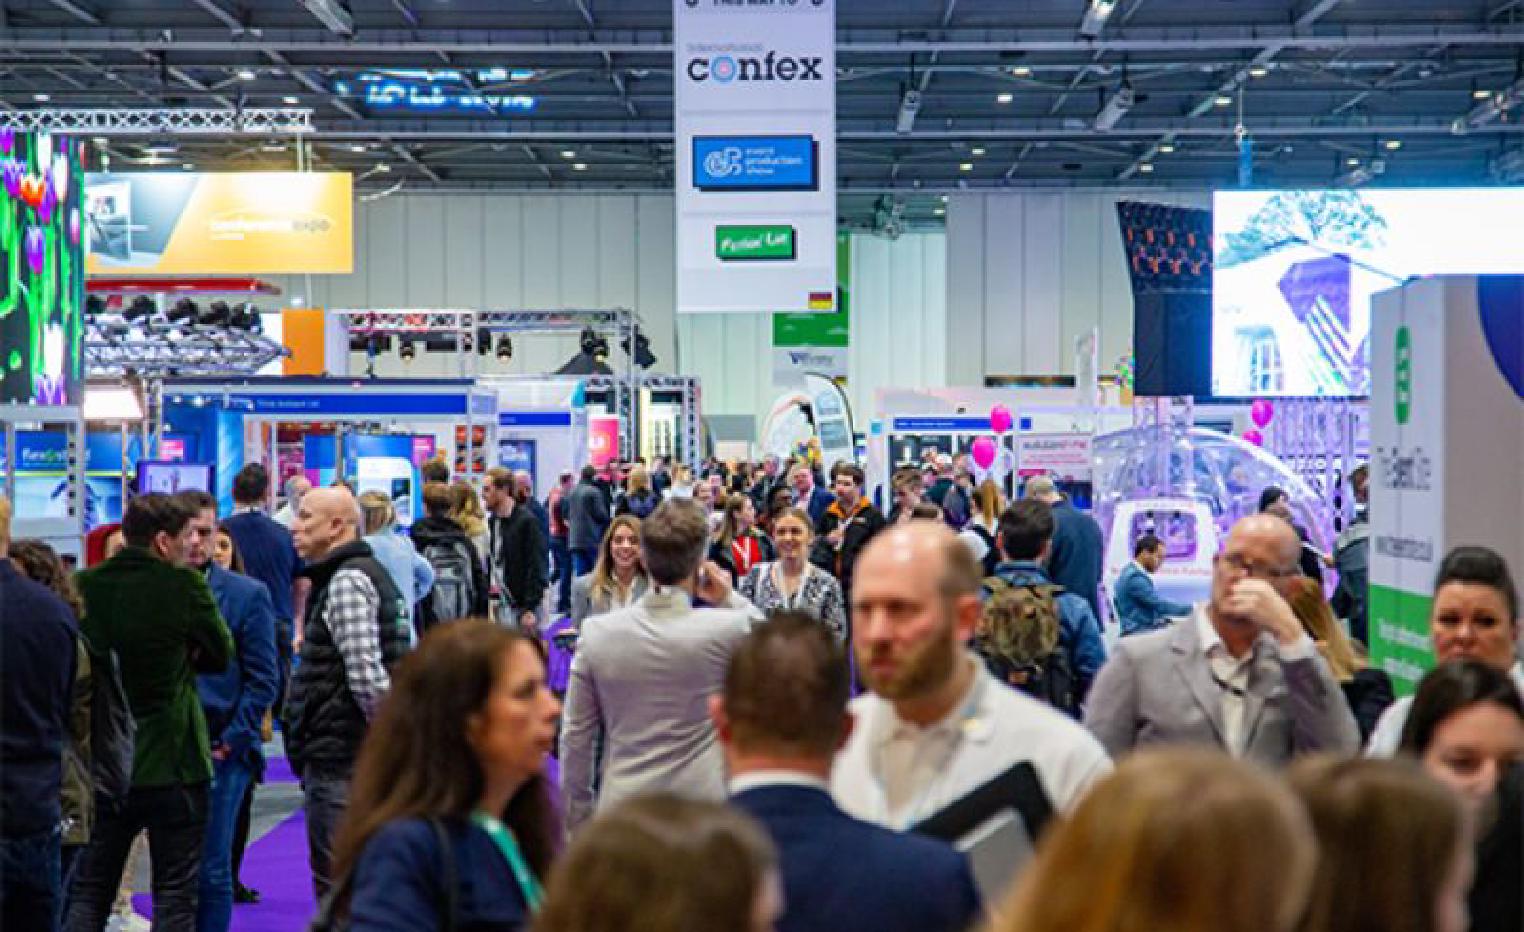 5 things we learnt from exhibiting back on the show floor